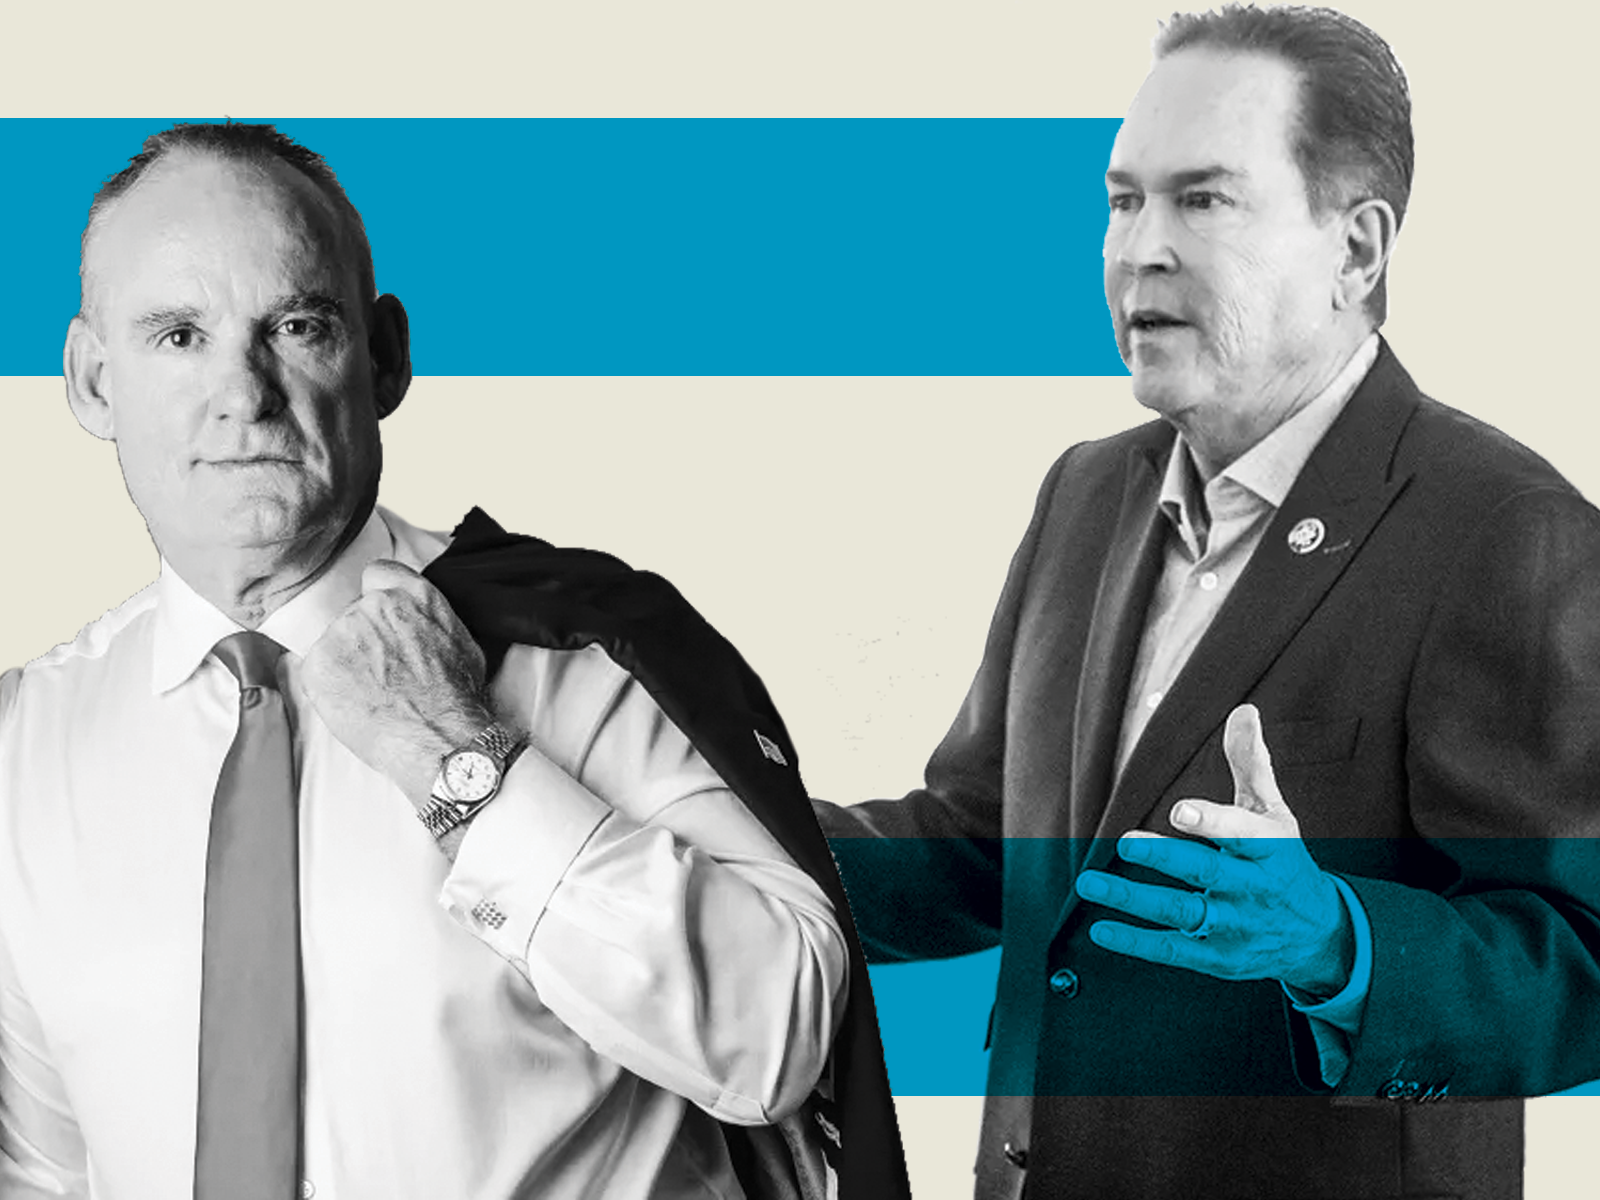 How Vern Buchanan crushed a Primary challenge from Martin Hyde